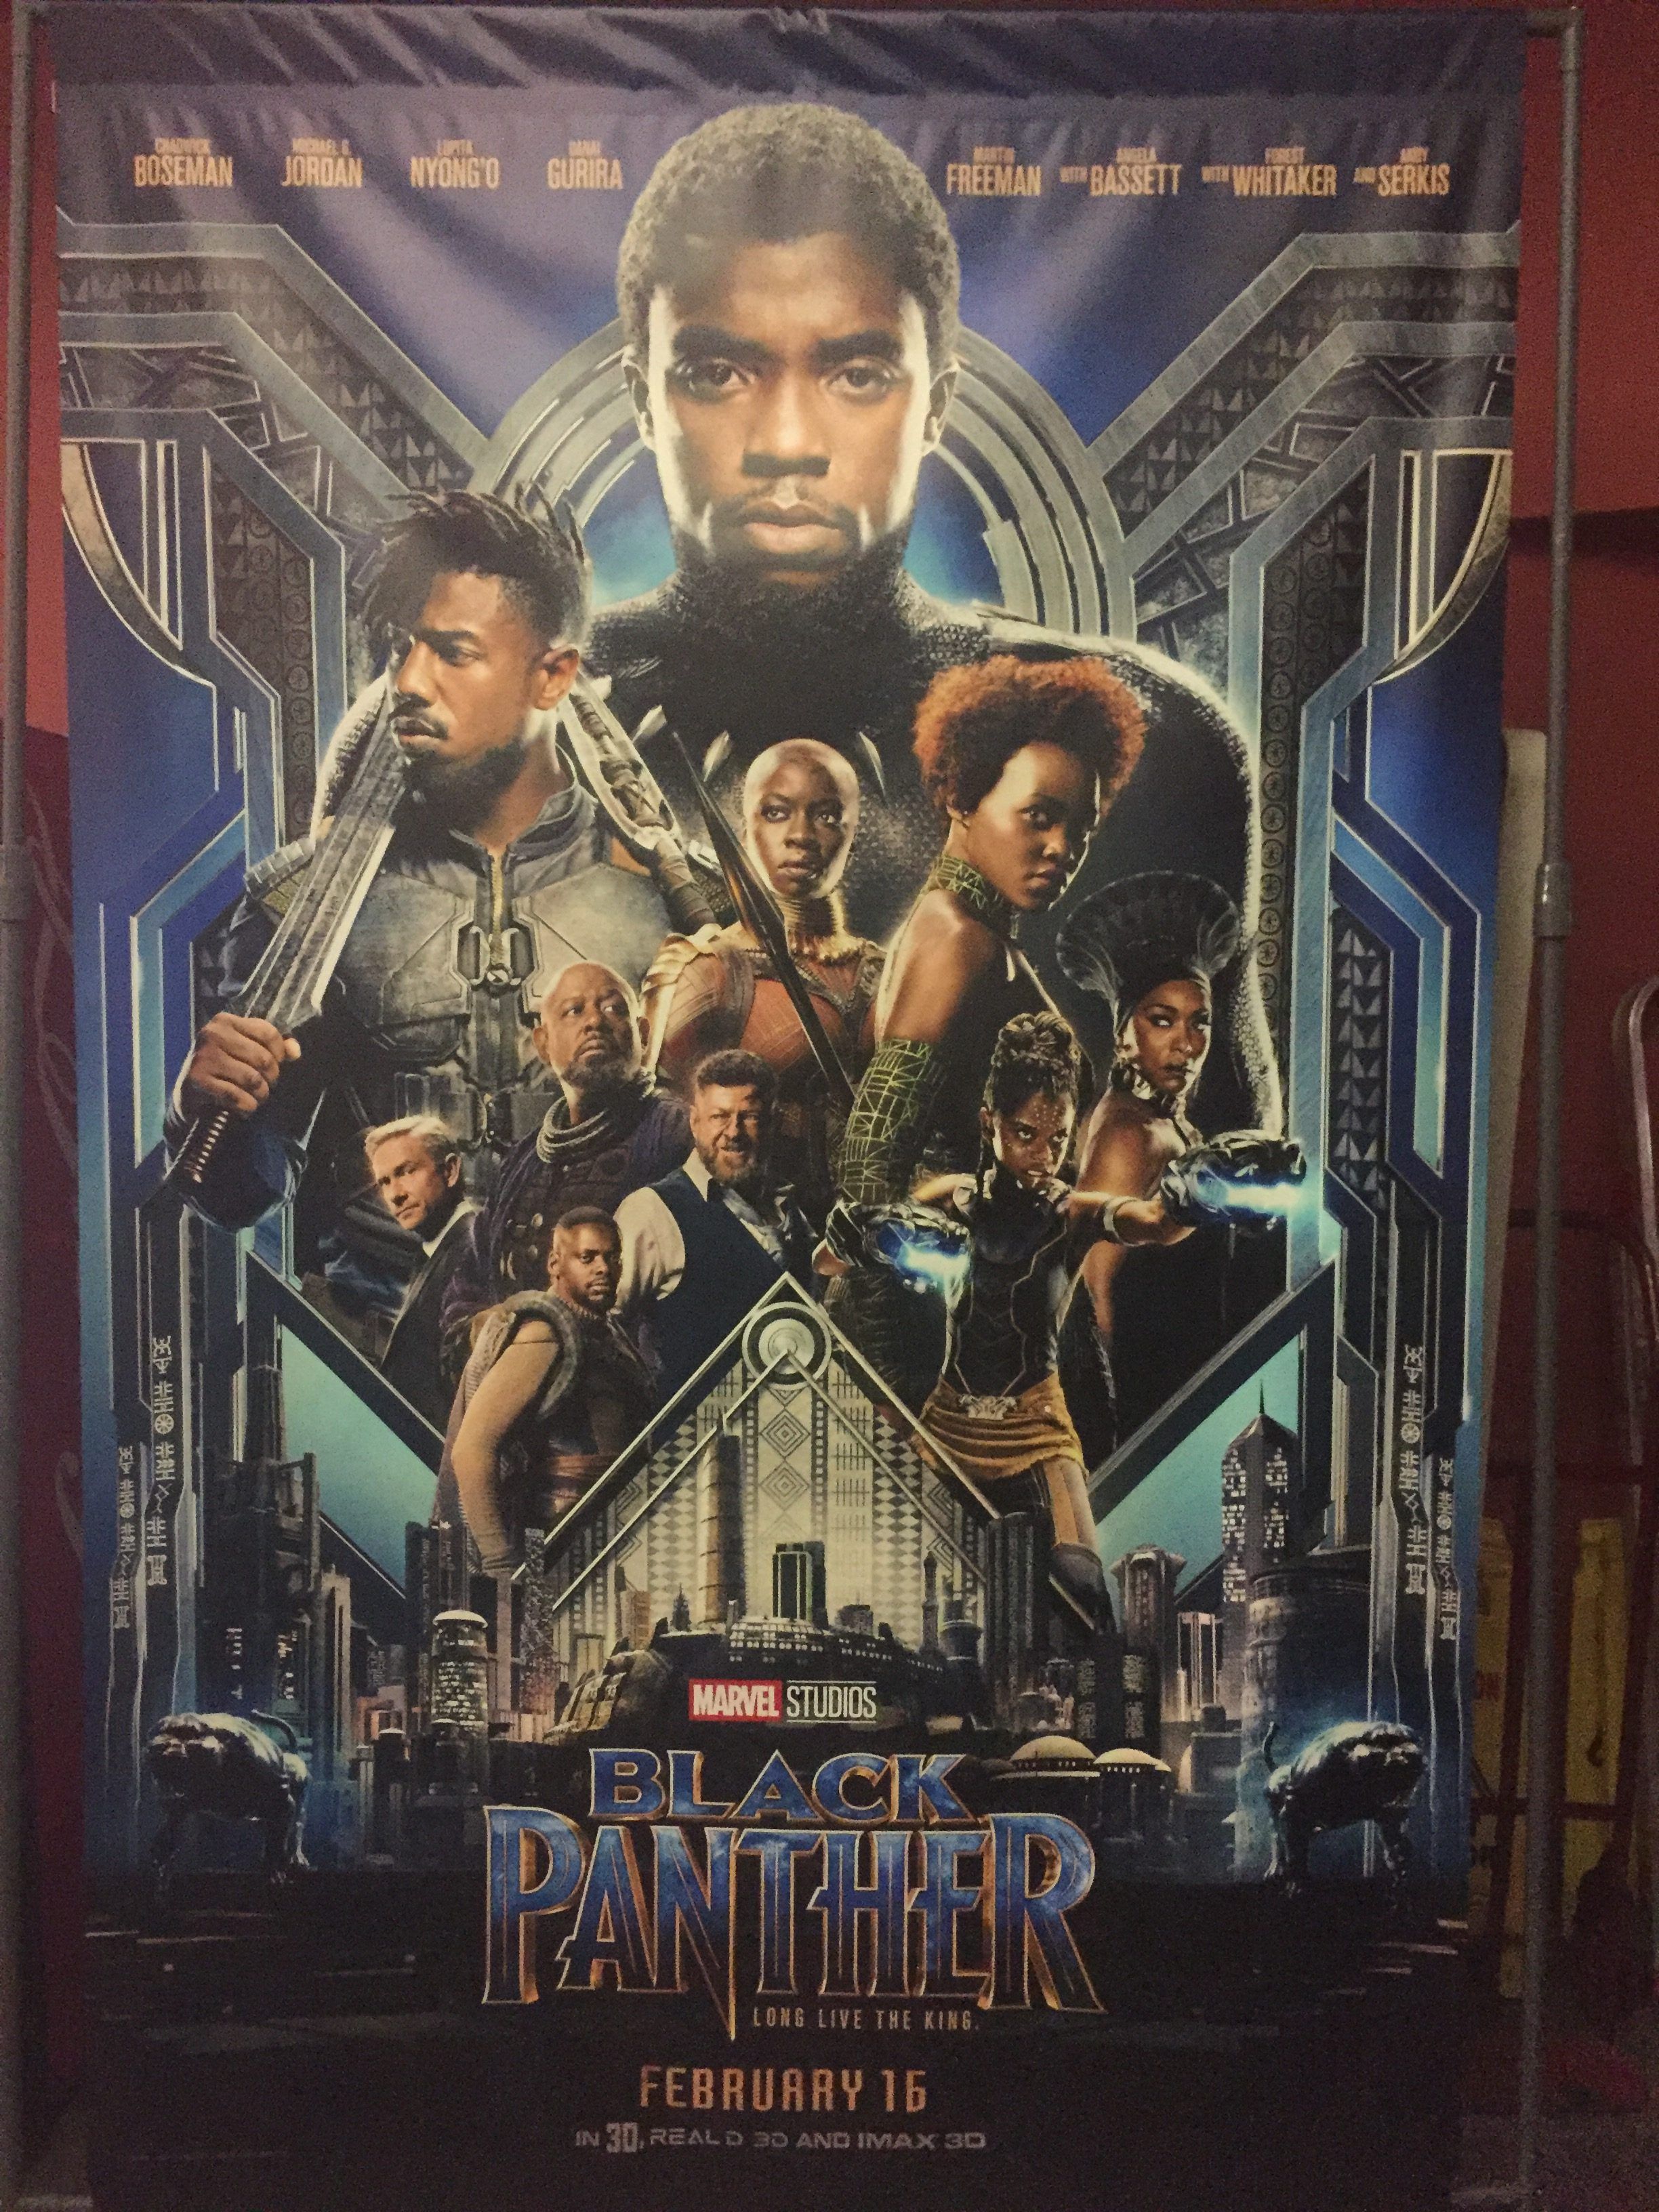 "Black Panther" has been regarded has quickly become regarded as one of the greatest films in the Marvel Cinematic Universe. Photo by Justin Barnes